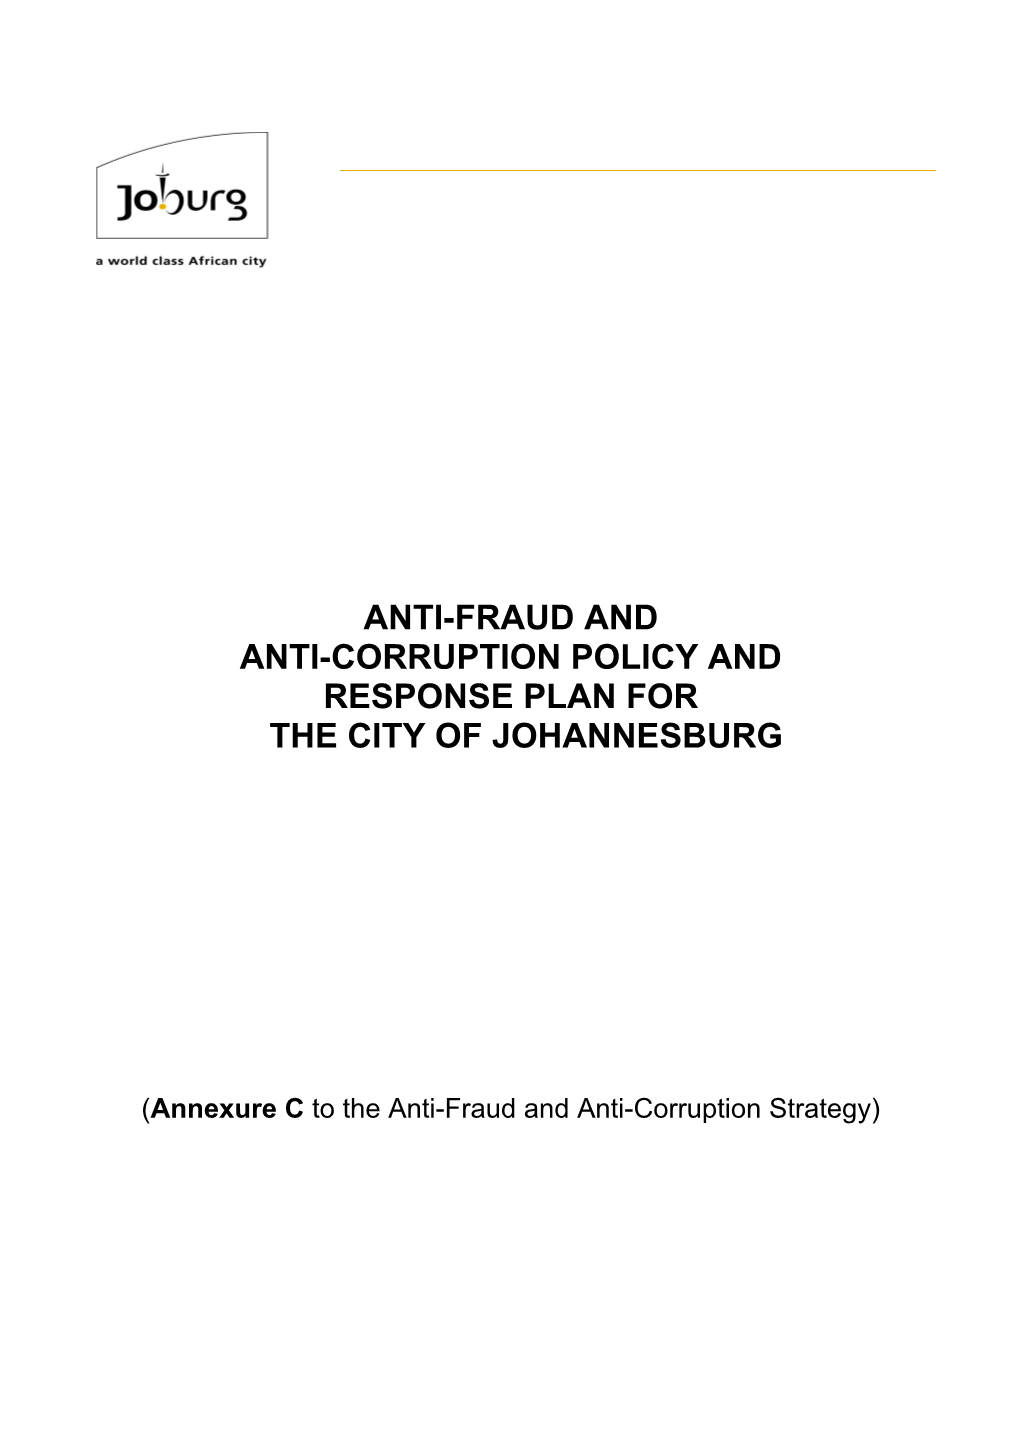 Anti-Fraud and Anti-Corruption Policy and Response Plan